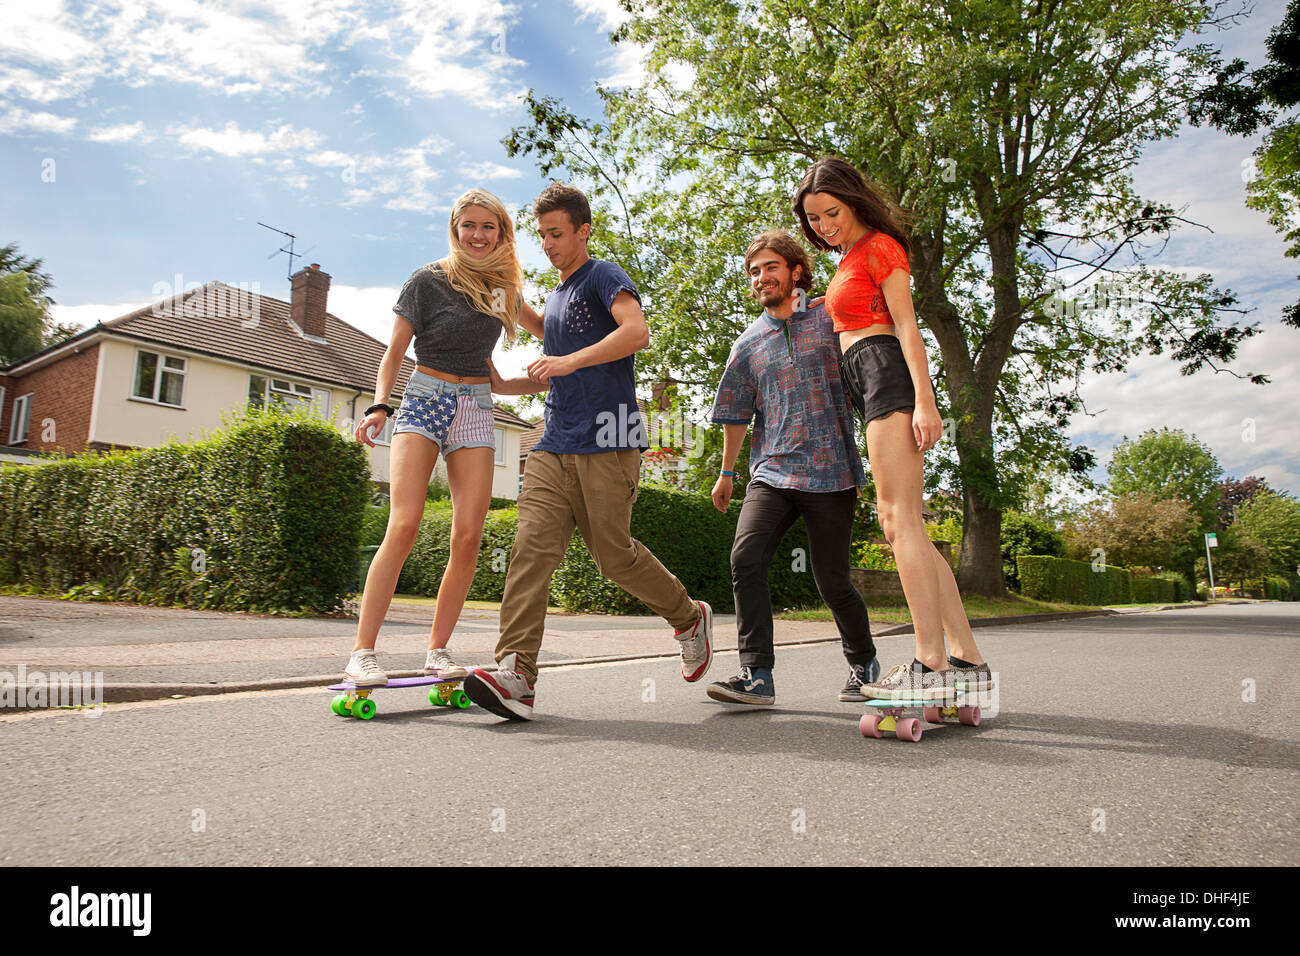 Two young couples skateboarding on road Stock Photo